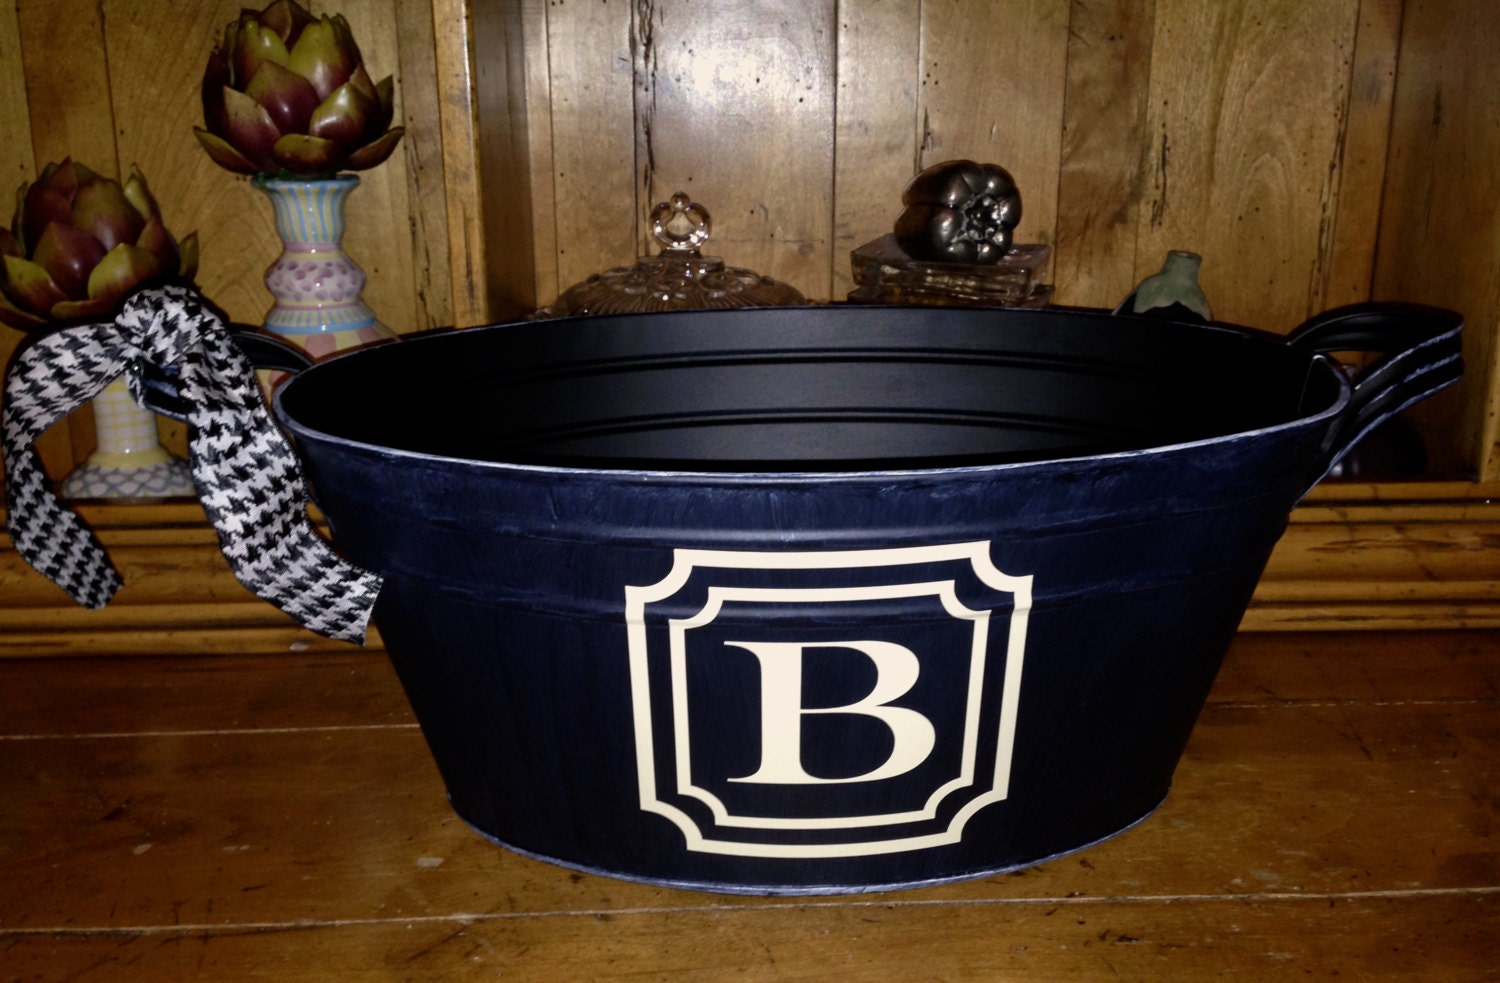 Personalized Metal Tub / Oval Metal Beverage Tub. Perfect for